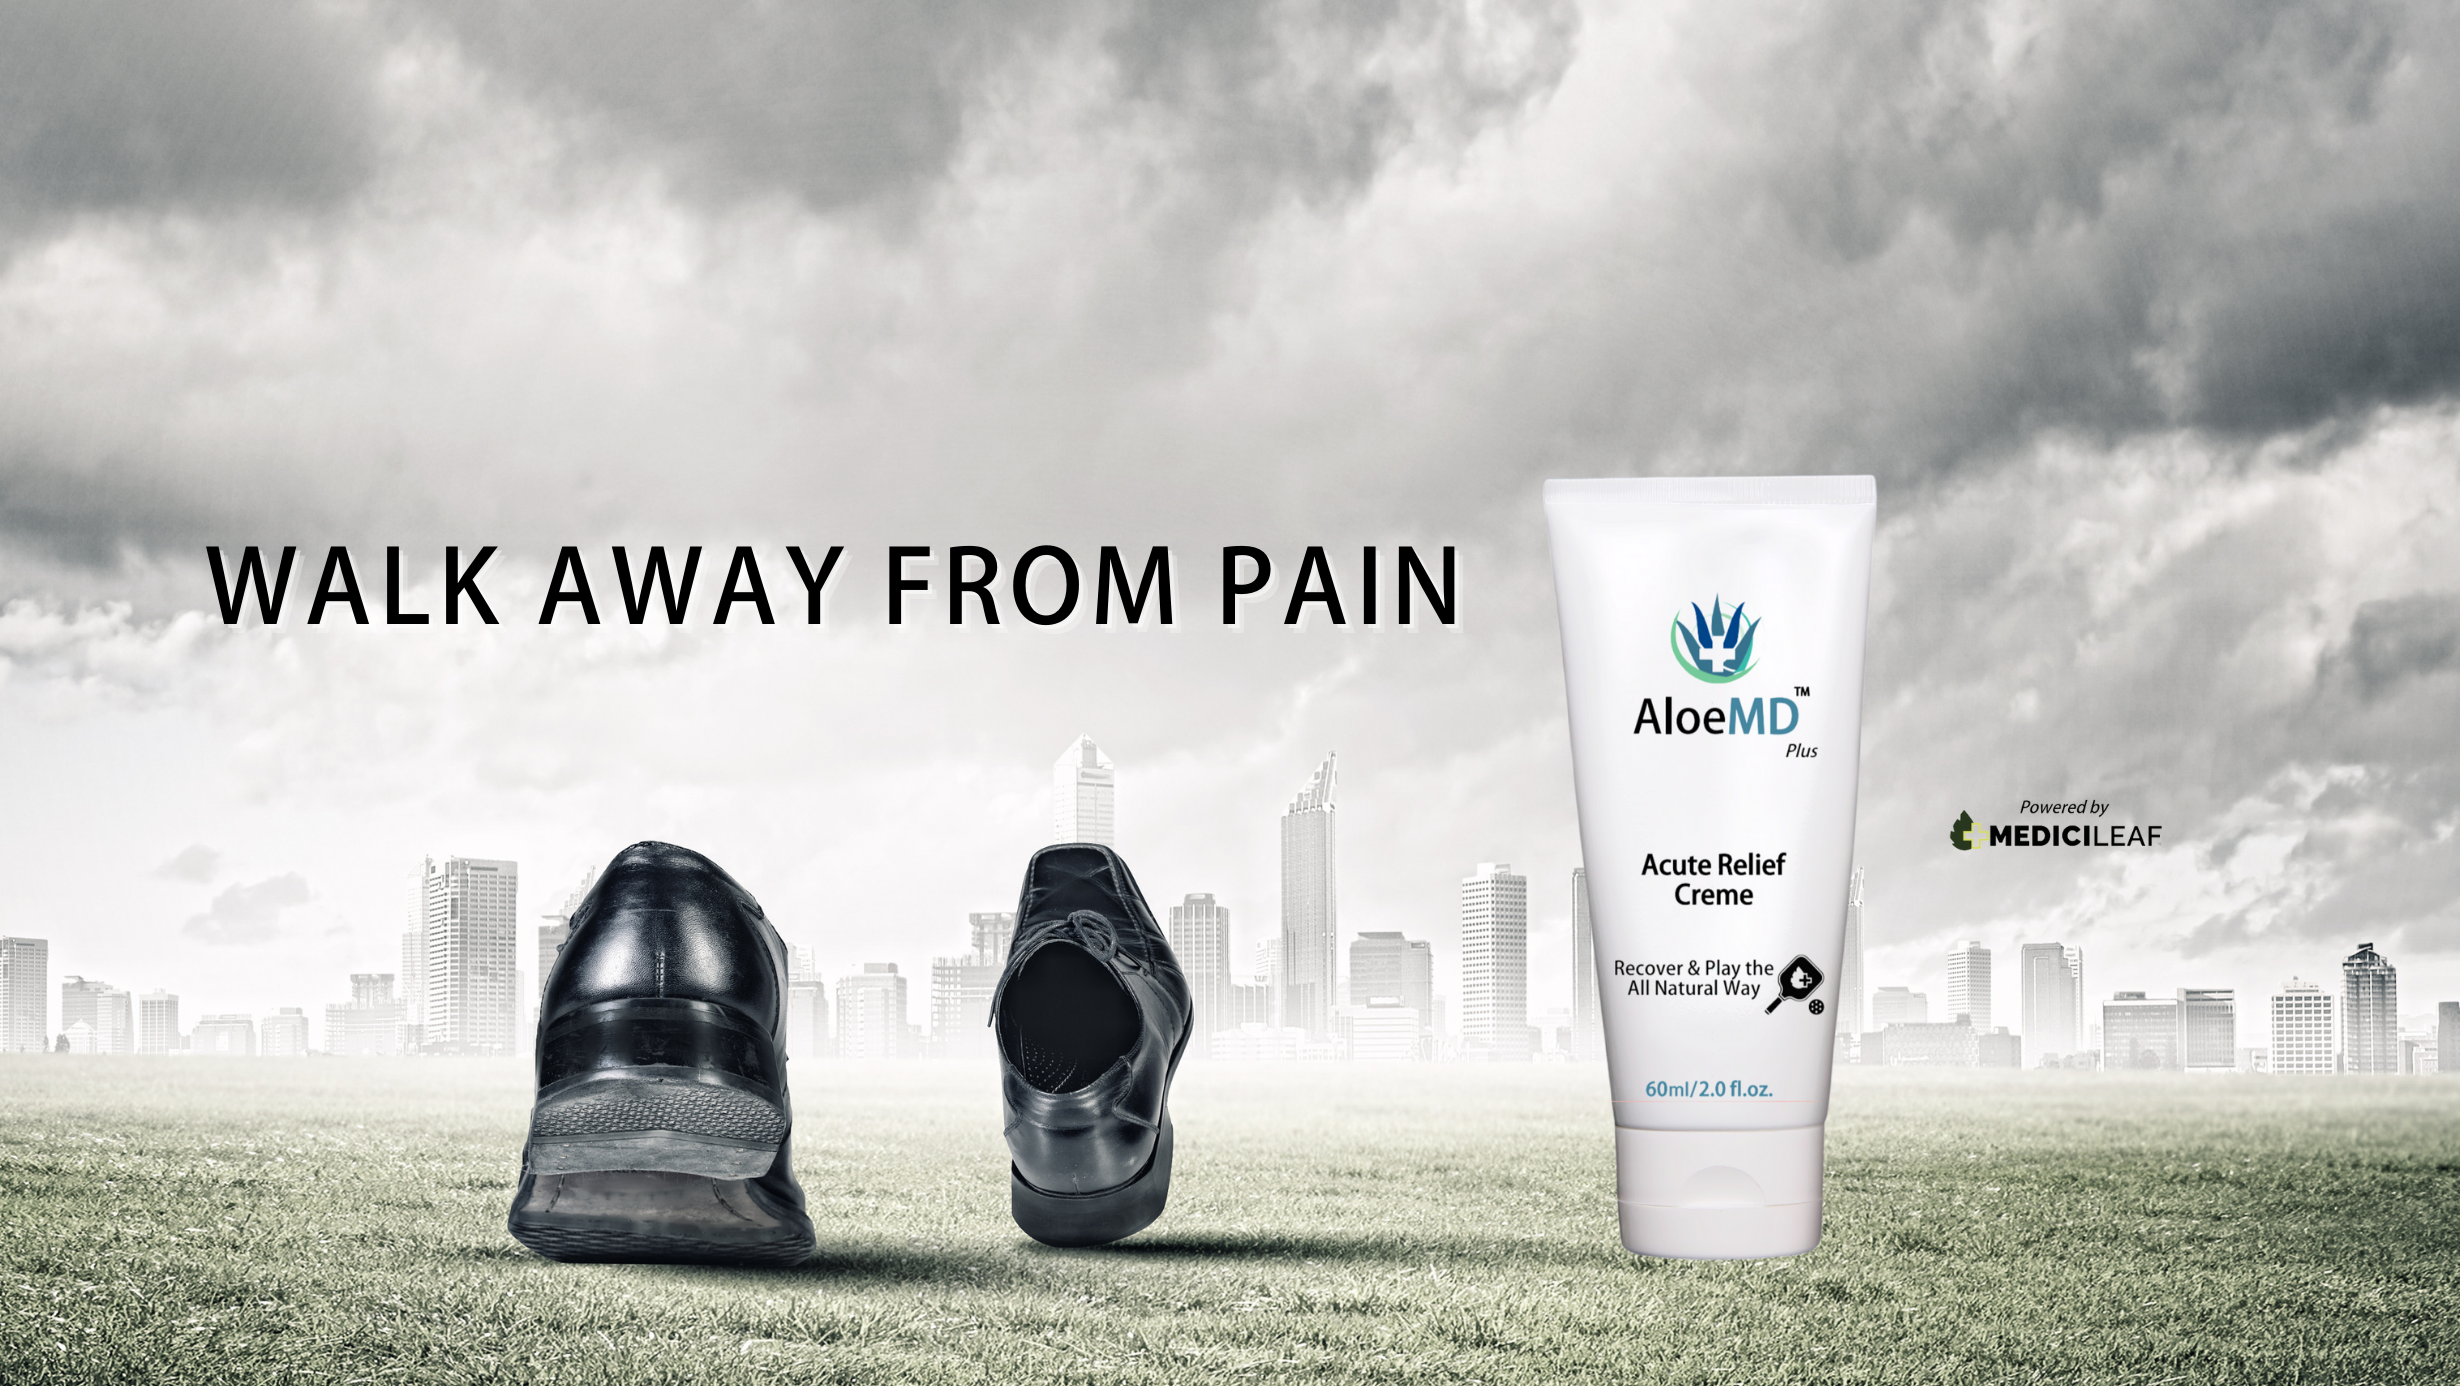 HW&B Enterprises, (AloeVeritas) and Medicileaf Are Set to Revolutionize the Topical Pain and Sports Recovery Industries with Their Launch of AloeMD Plus